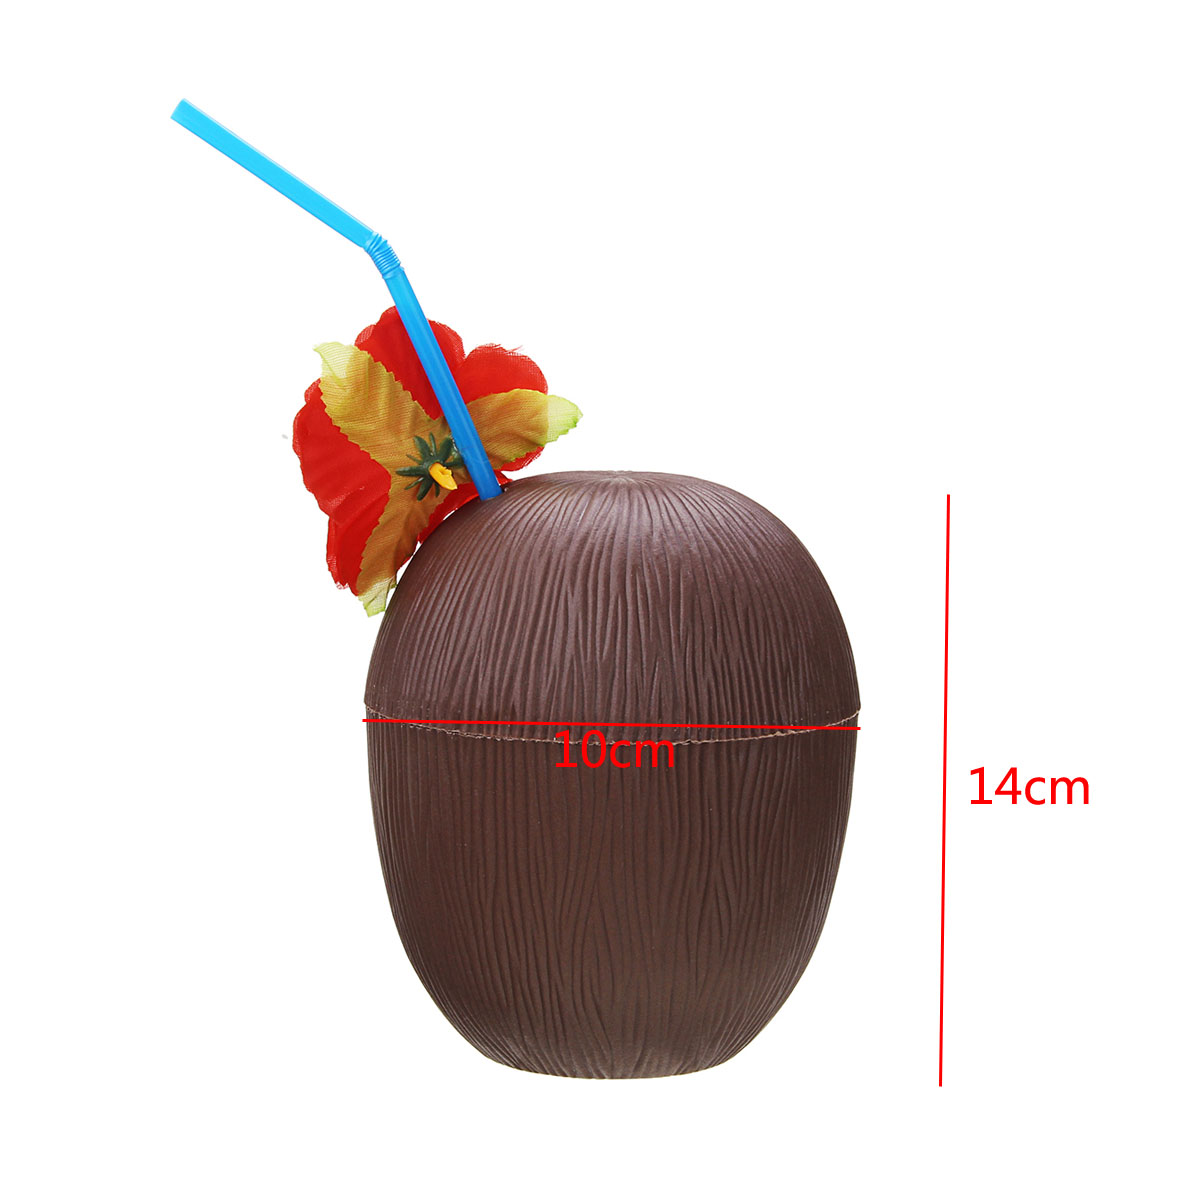 Plastic-Tropical-Coconut-Cup-Bottle-w-Straw-Summer-Hawaii-Luau-Party-Beach-Pool-Party-1374247